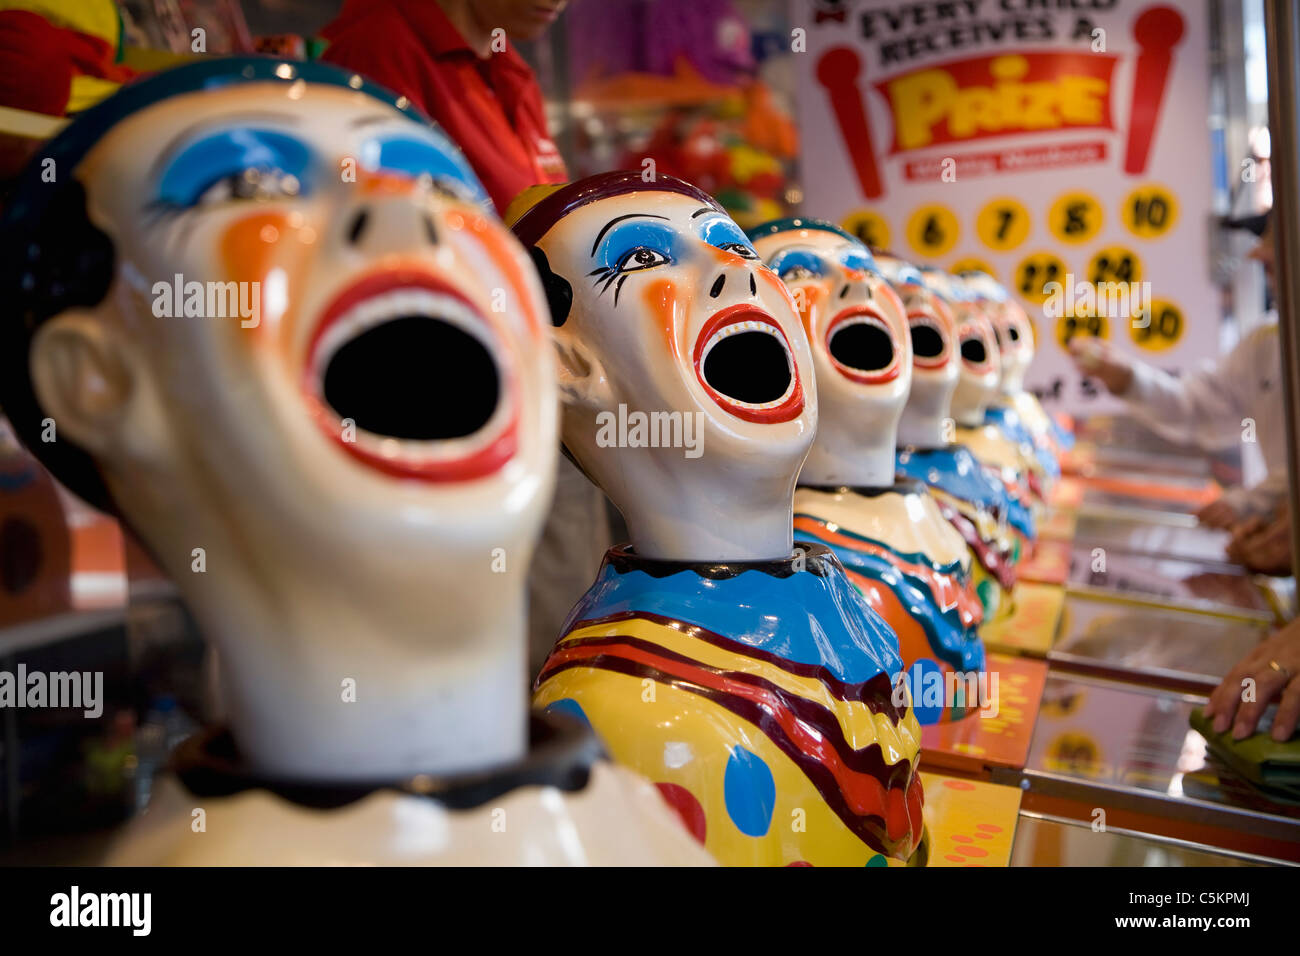 Model heads of clowns with open mouths for a ball game at at stall in a street fair, Cuba Street, Wellington, New Zealand Stock Photo